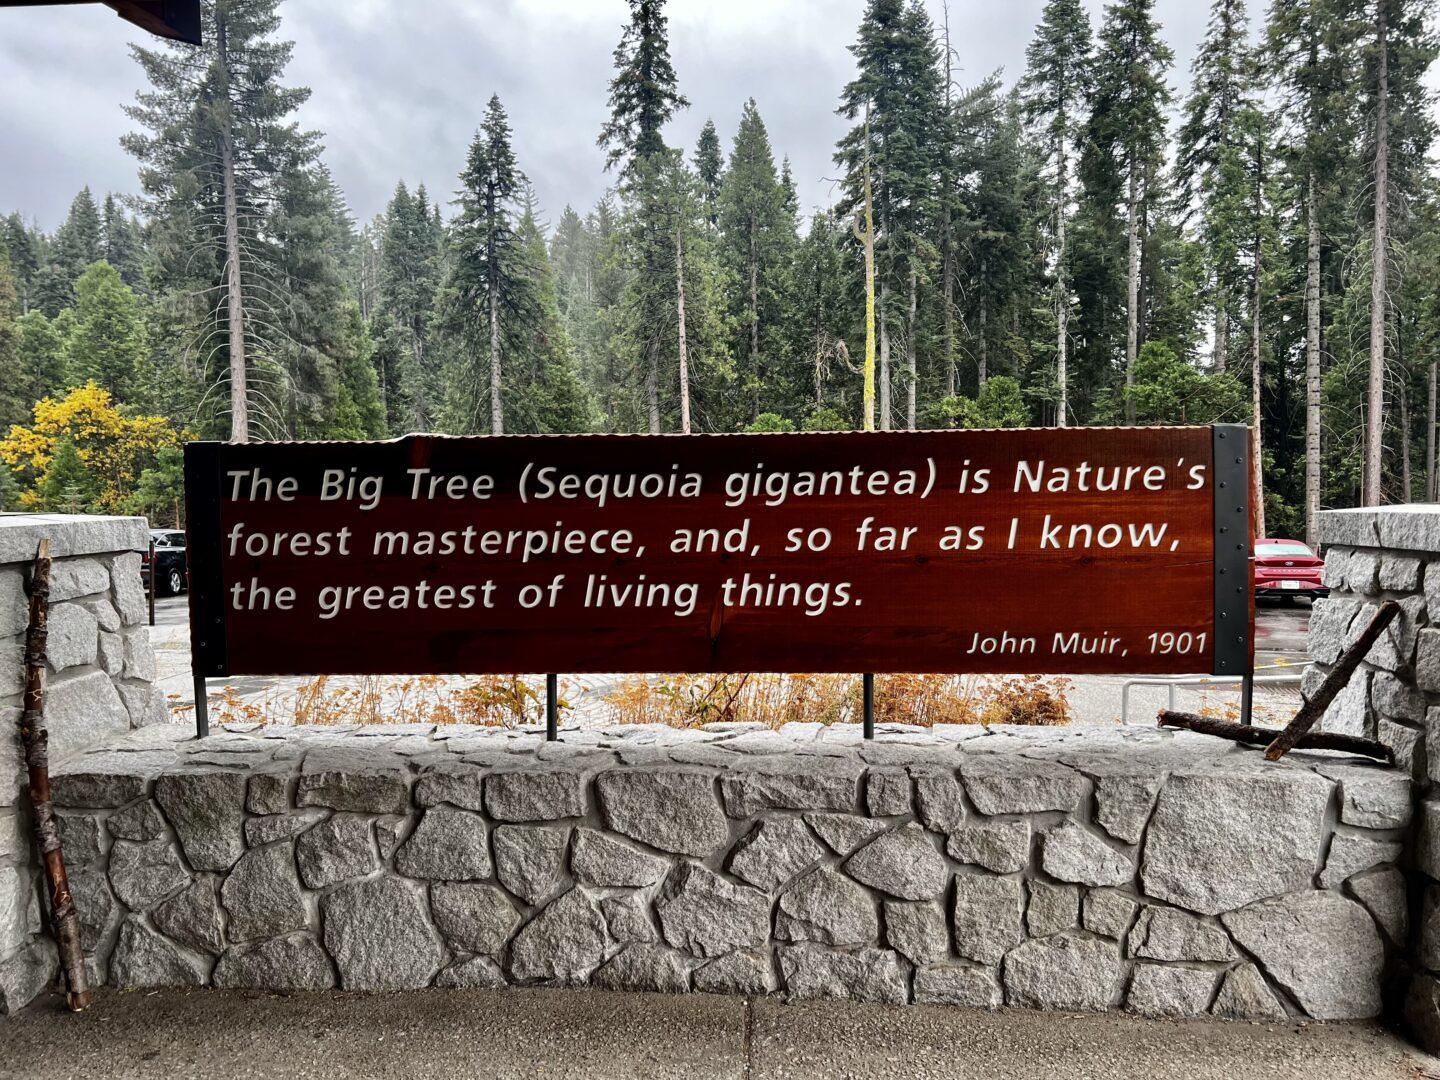 John Muir quote about sequoia trees